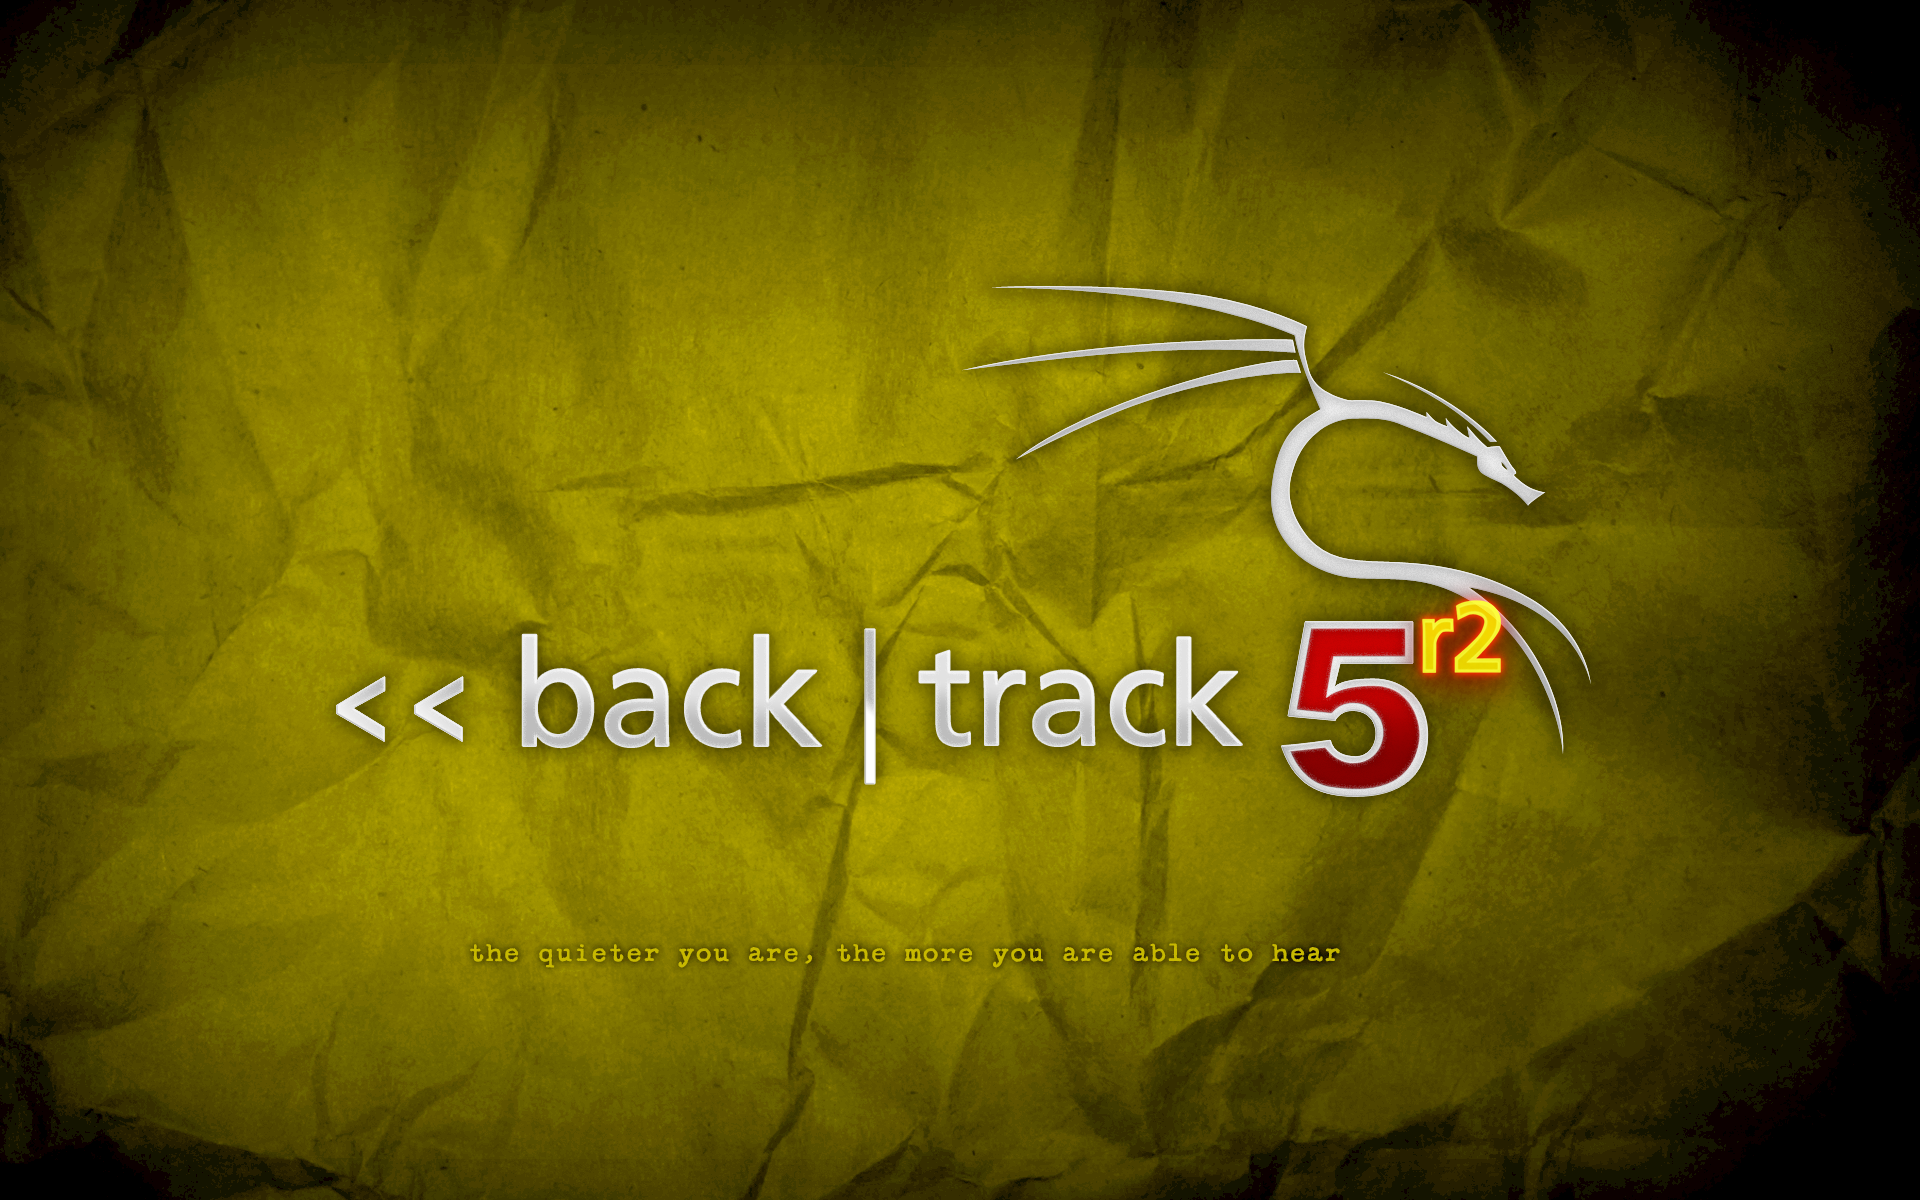 backtrack-5r2-yellow.png